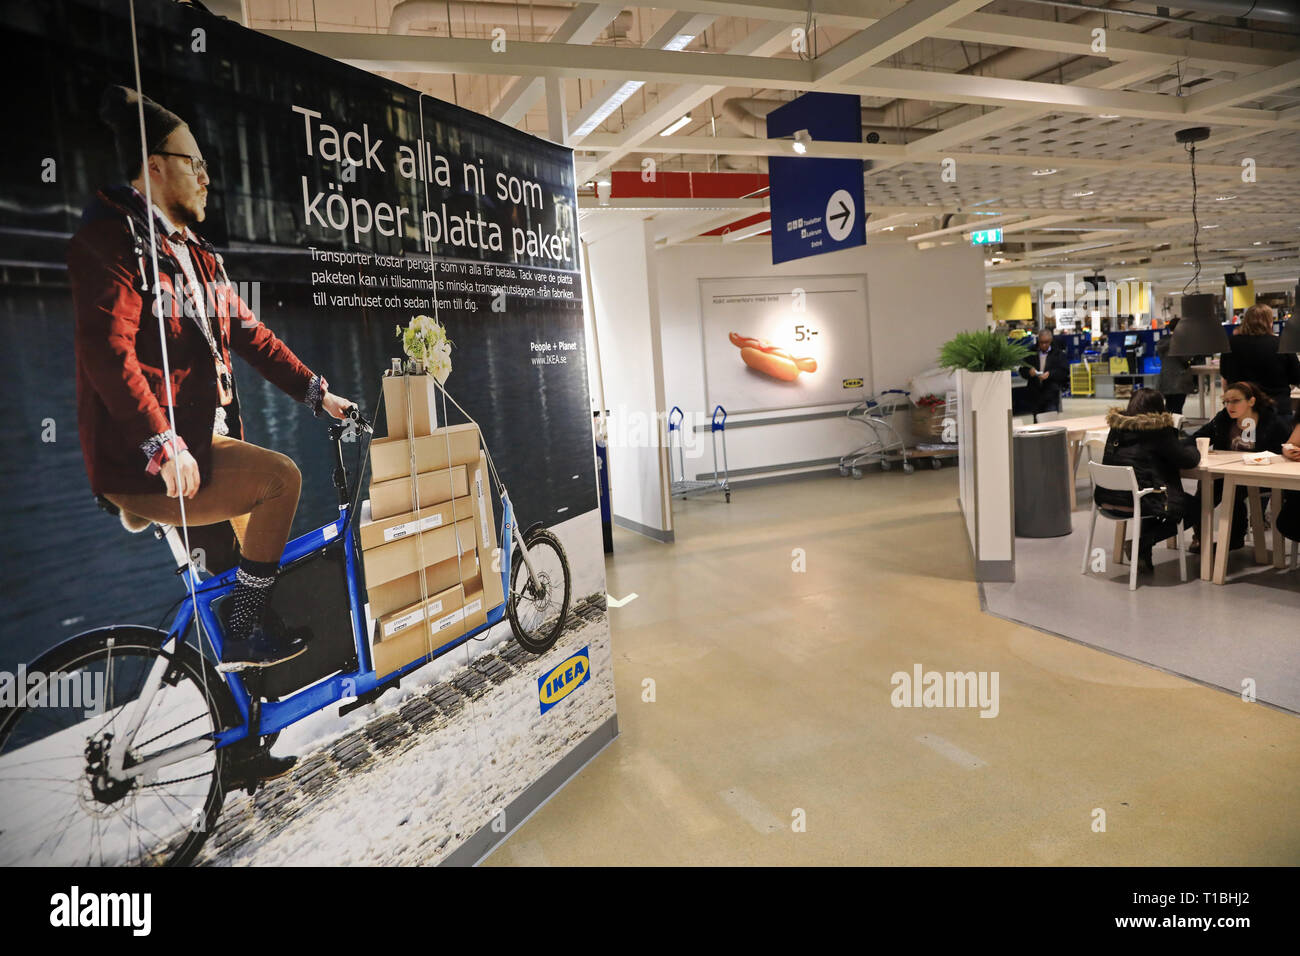 LINKÖPING 20180128 Ikea in Linköping on Sunday. In the morning, the announcement came that the founder and owner of Ikea, Ingvar Kamprad, died at the age of 91. Photo Jeppe Gustafsson Stock Photo